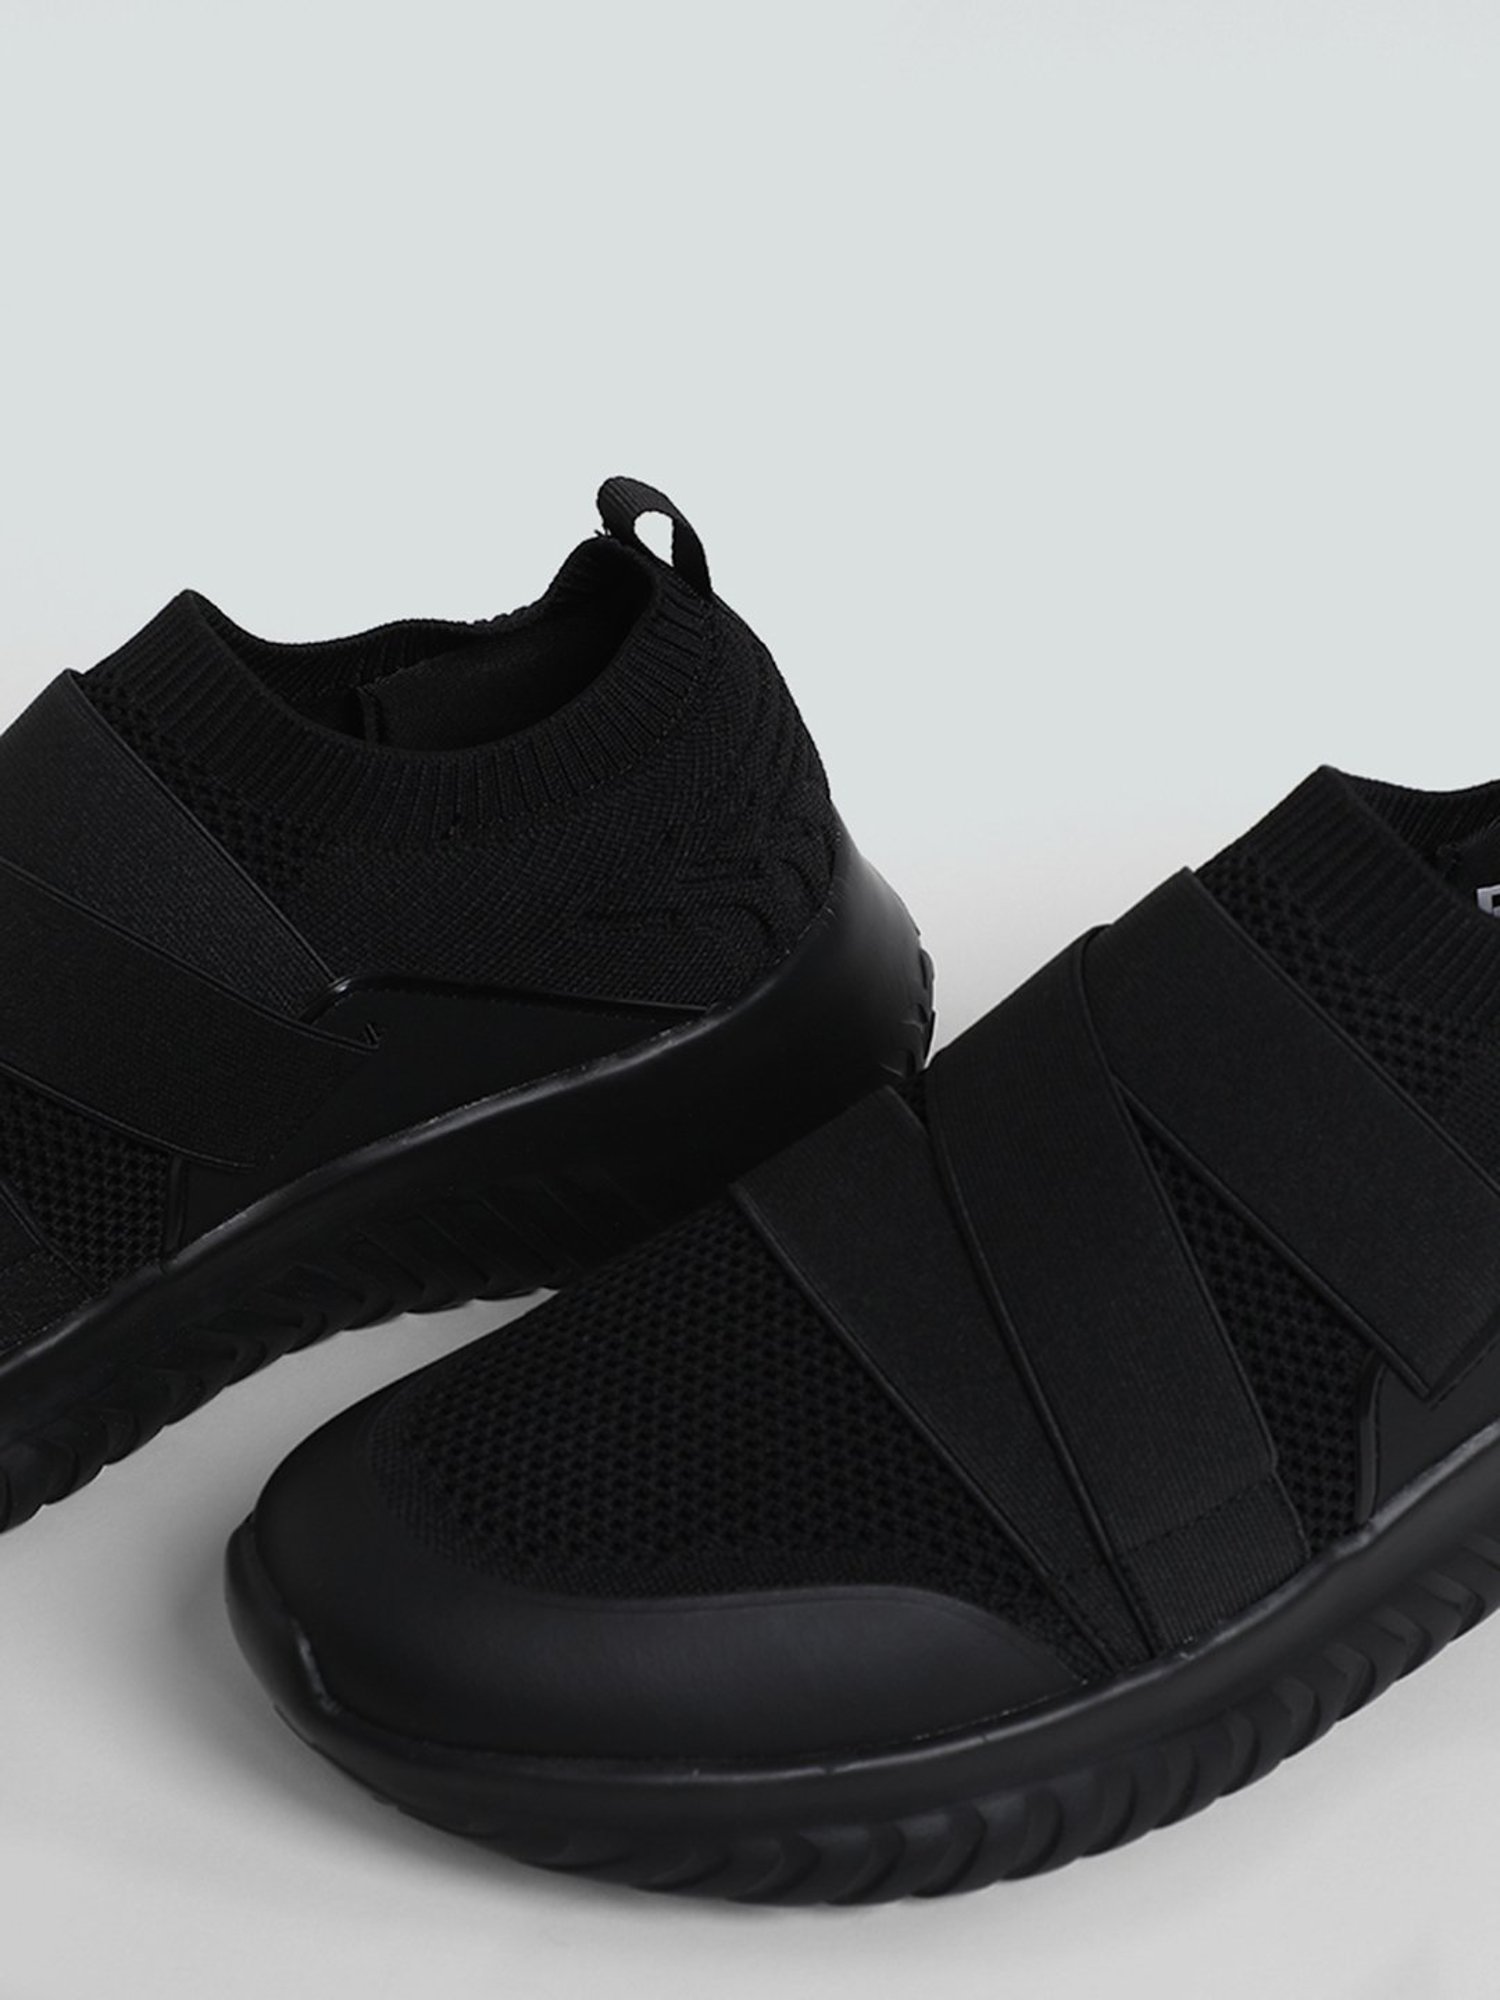 Buy Tiny Bugs Unisex Led Slip Ons Sneakers Black for Both (2-2Years)  Online, Shop at FirstCry.com - 15748218